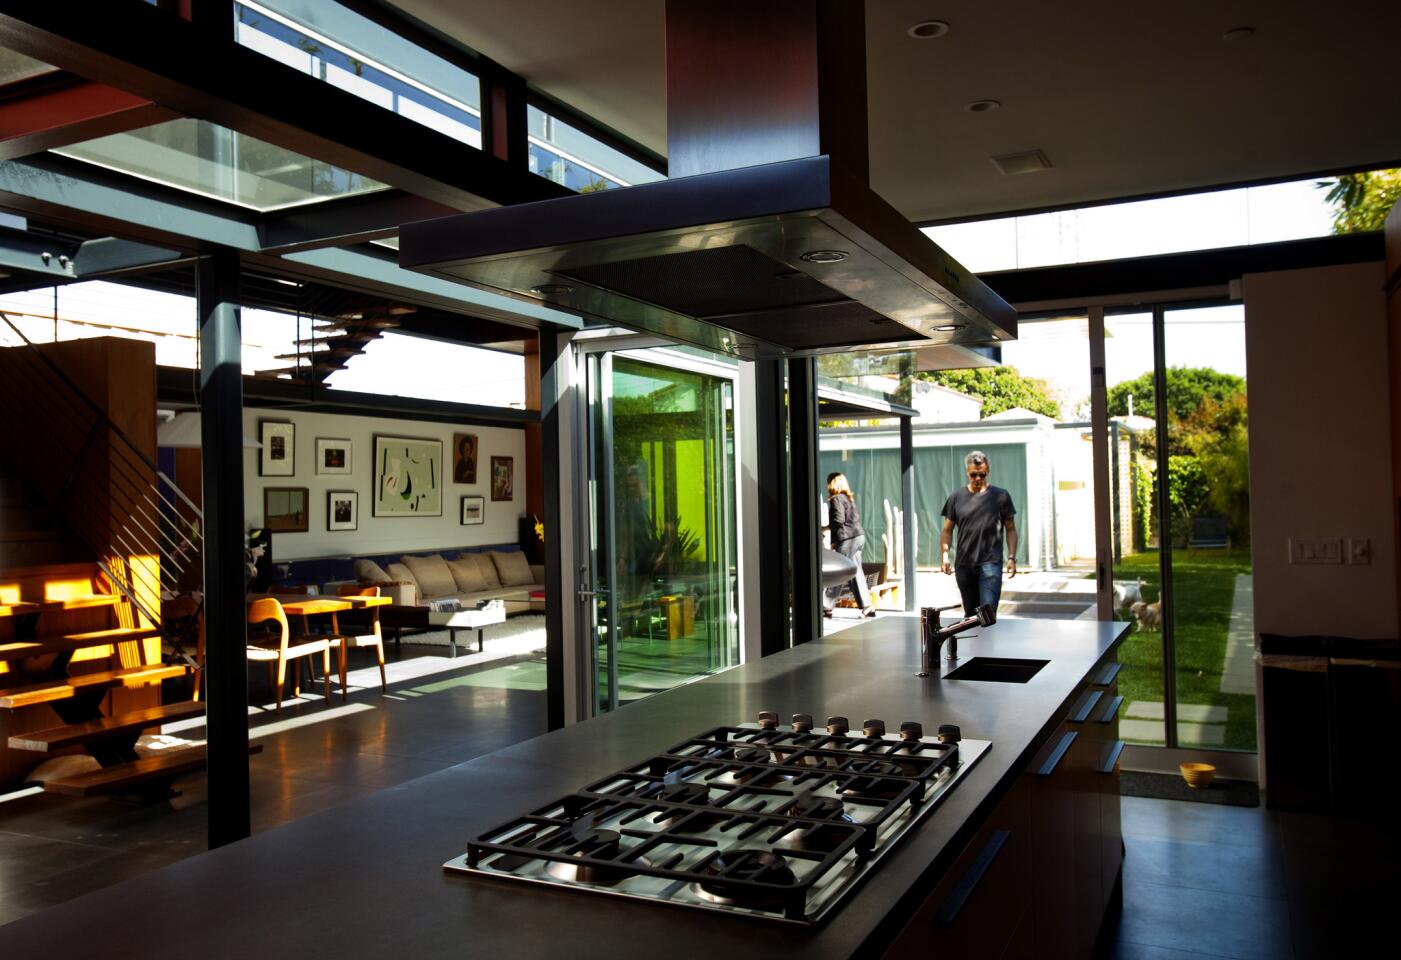 Walls of glass bring the outdoors in